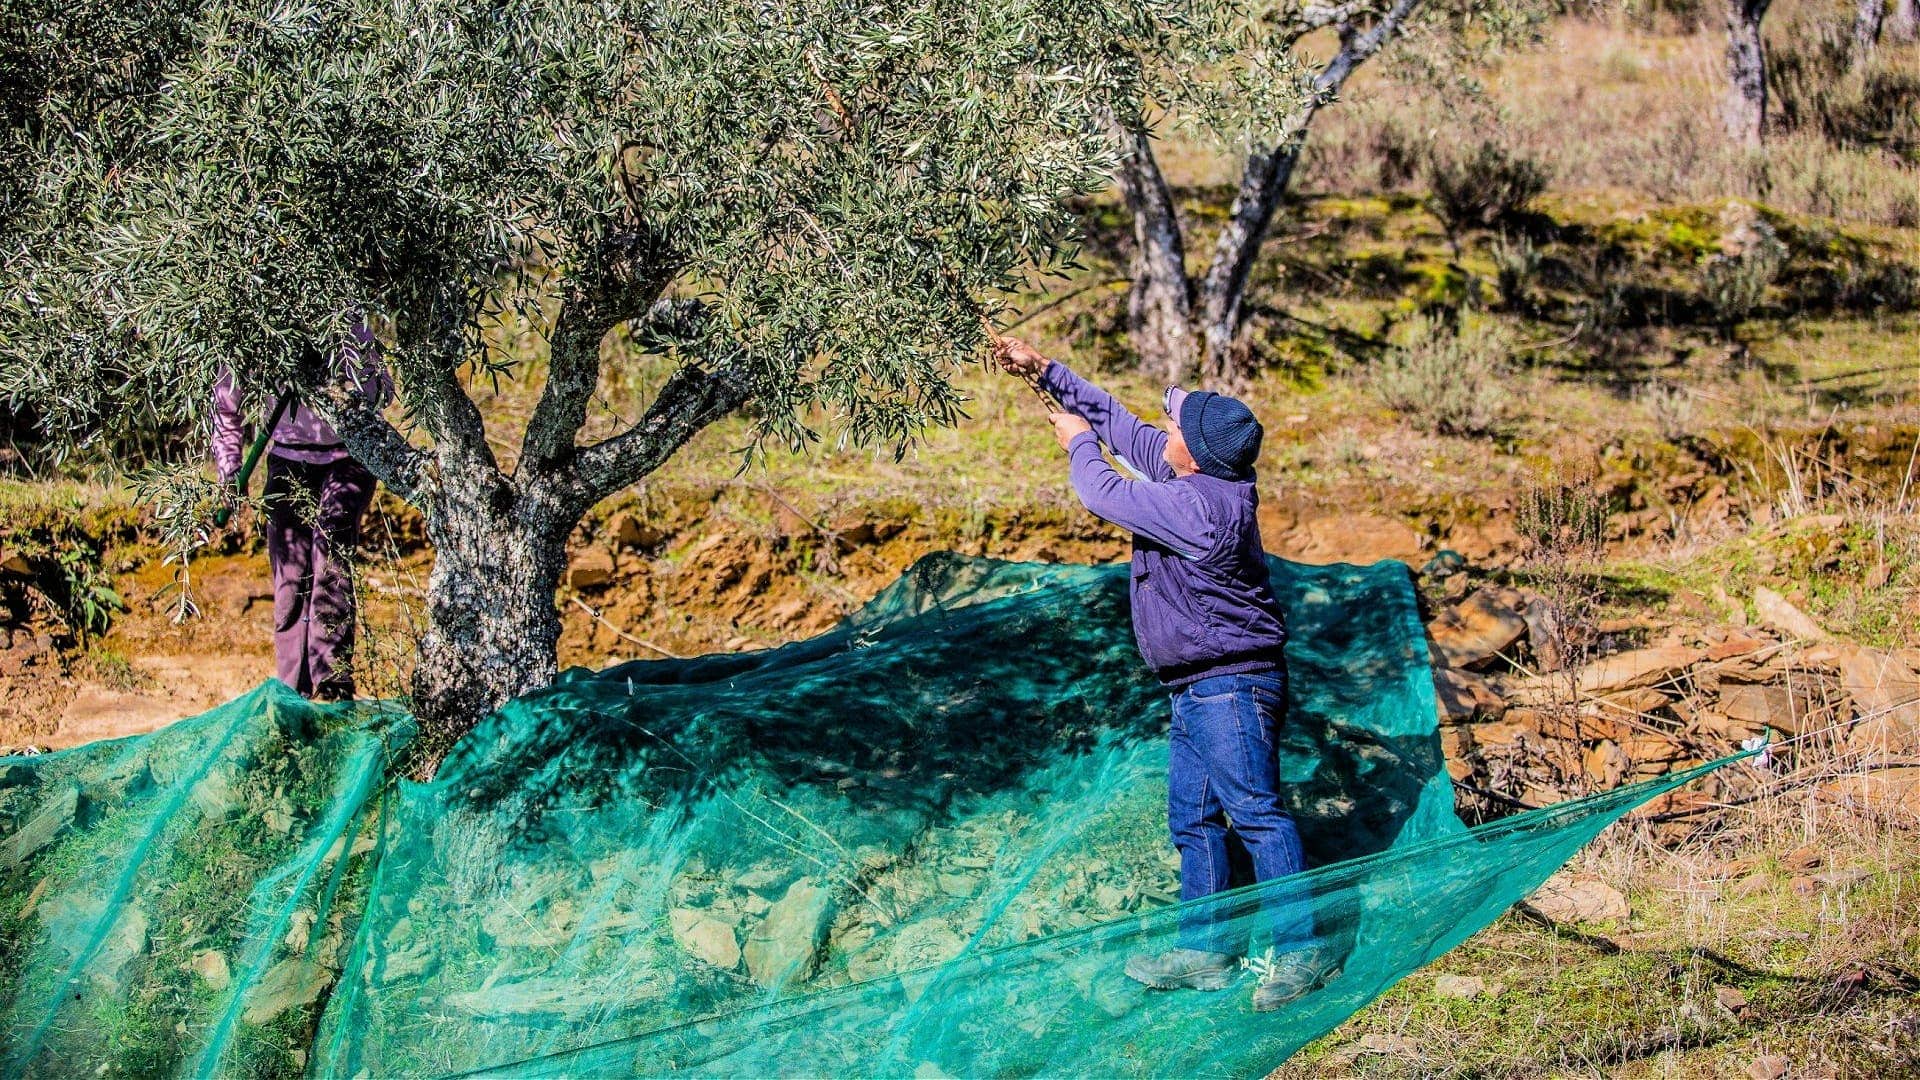 business-europe-production-olive-roil-production-in-portugali-to-to-slump- after-record-year-olive-roil-times